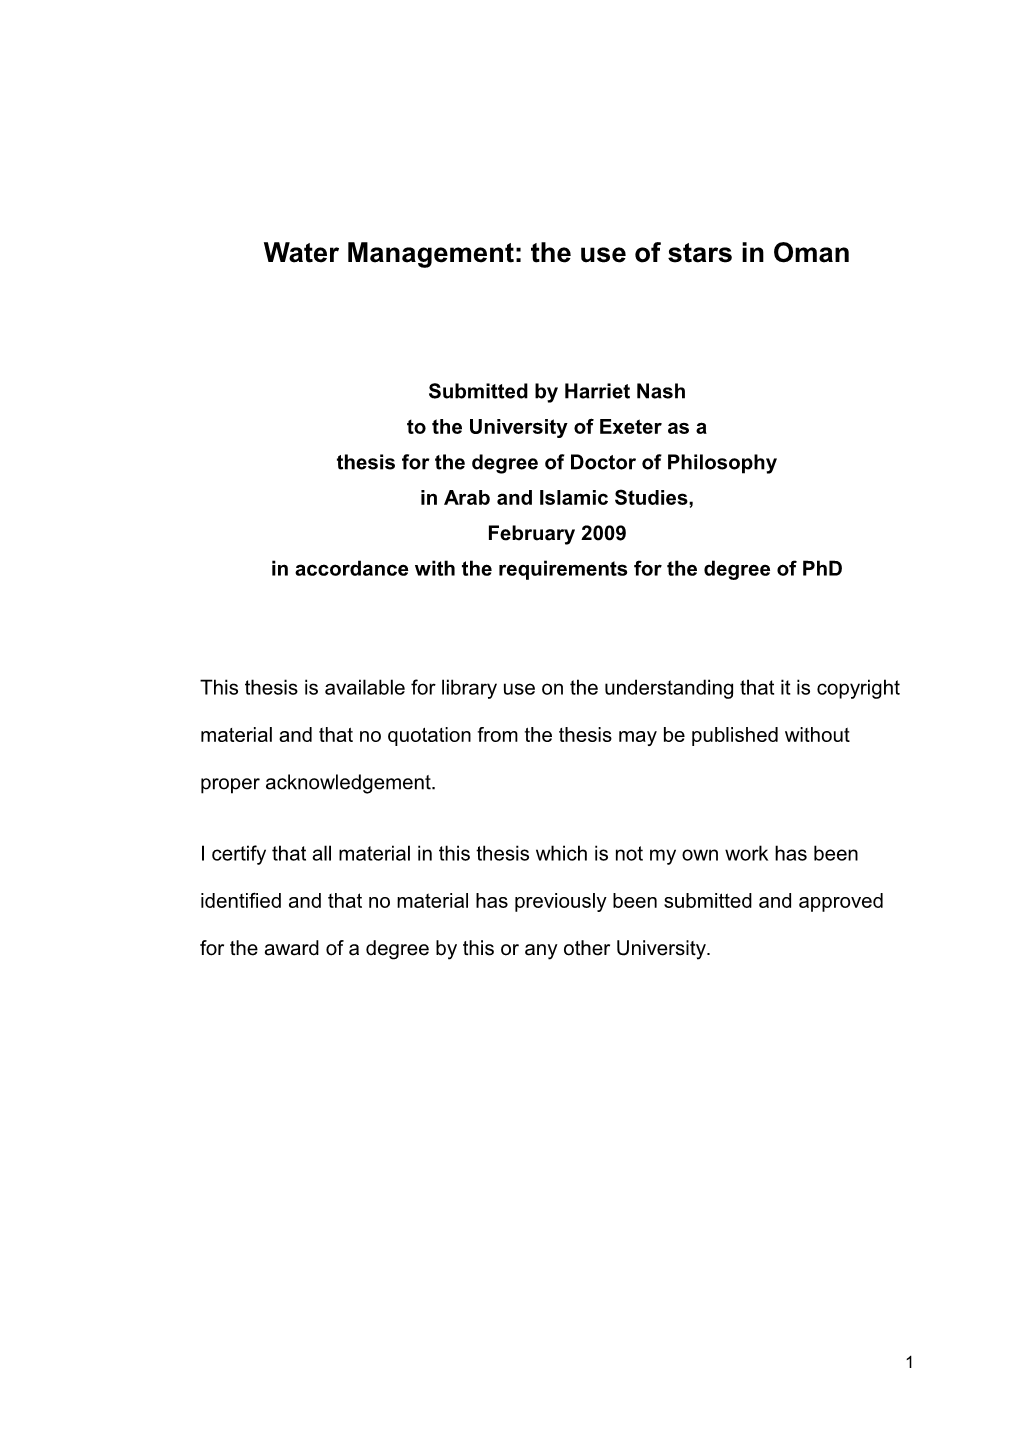 Star Gazing in Traditional Water Management